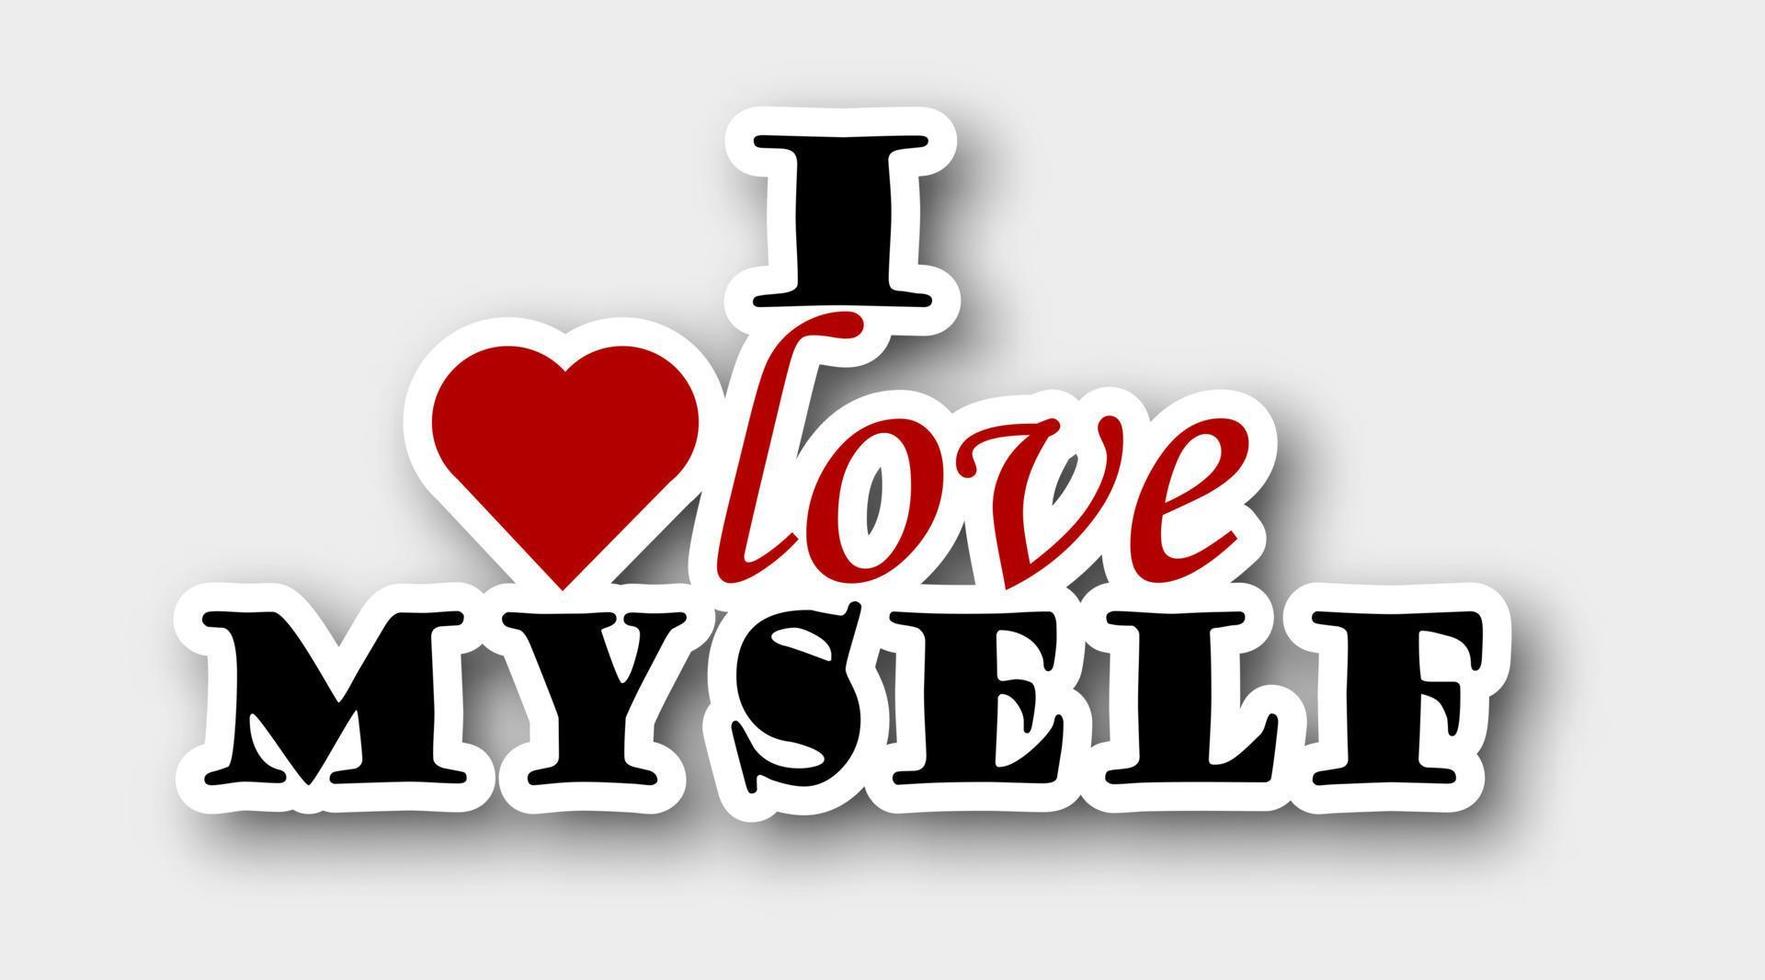 Sticker I love myself  isolated on white background vector